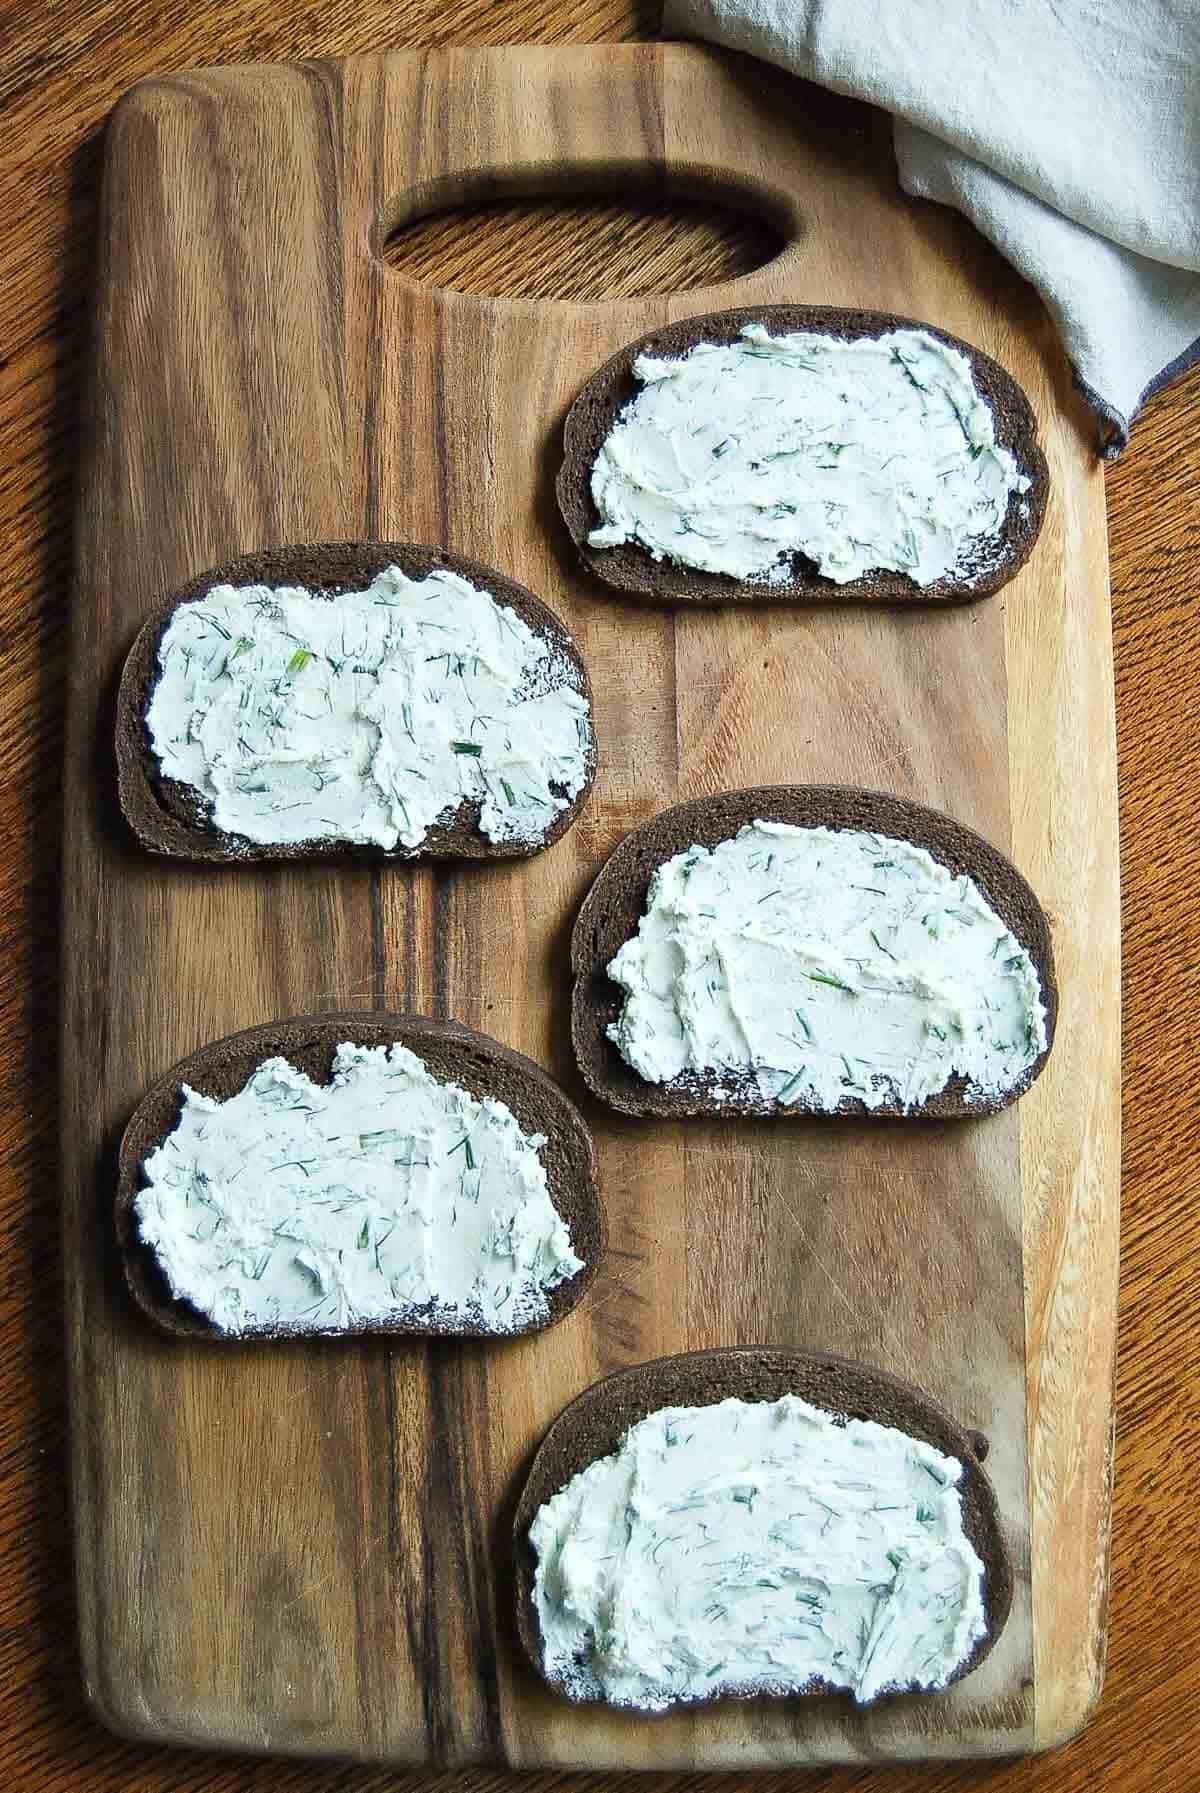 pumpernickel bread slices with herbed cream cheese.